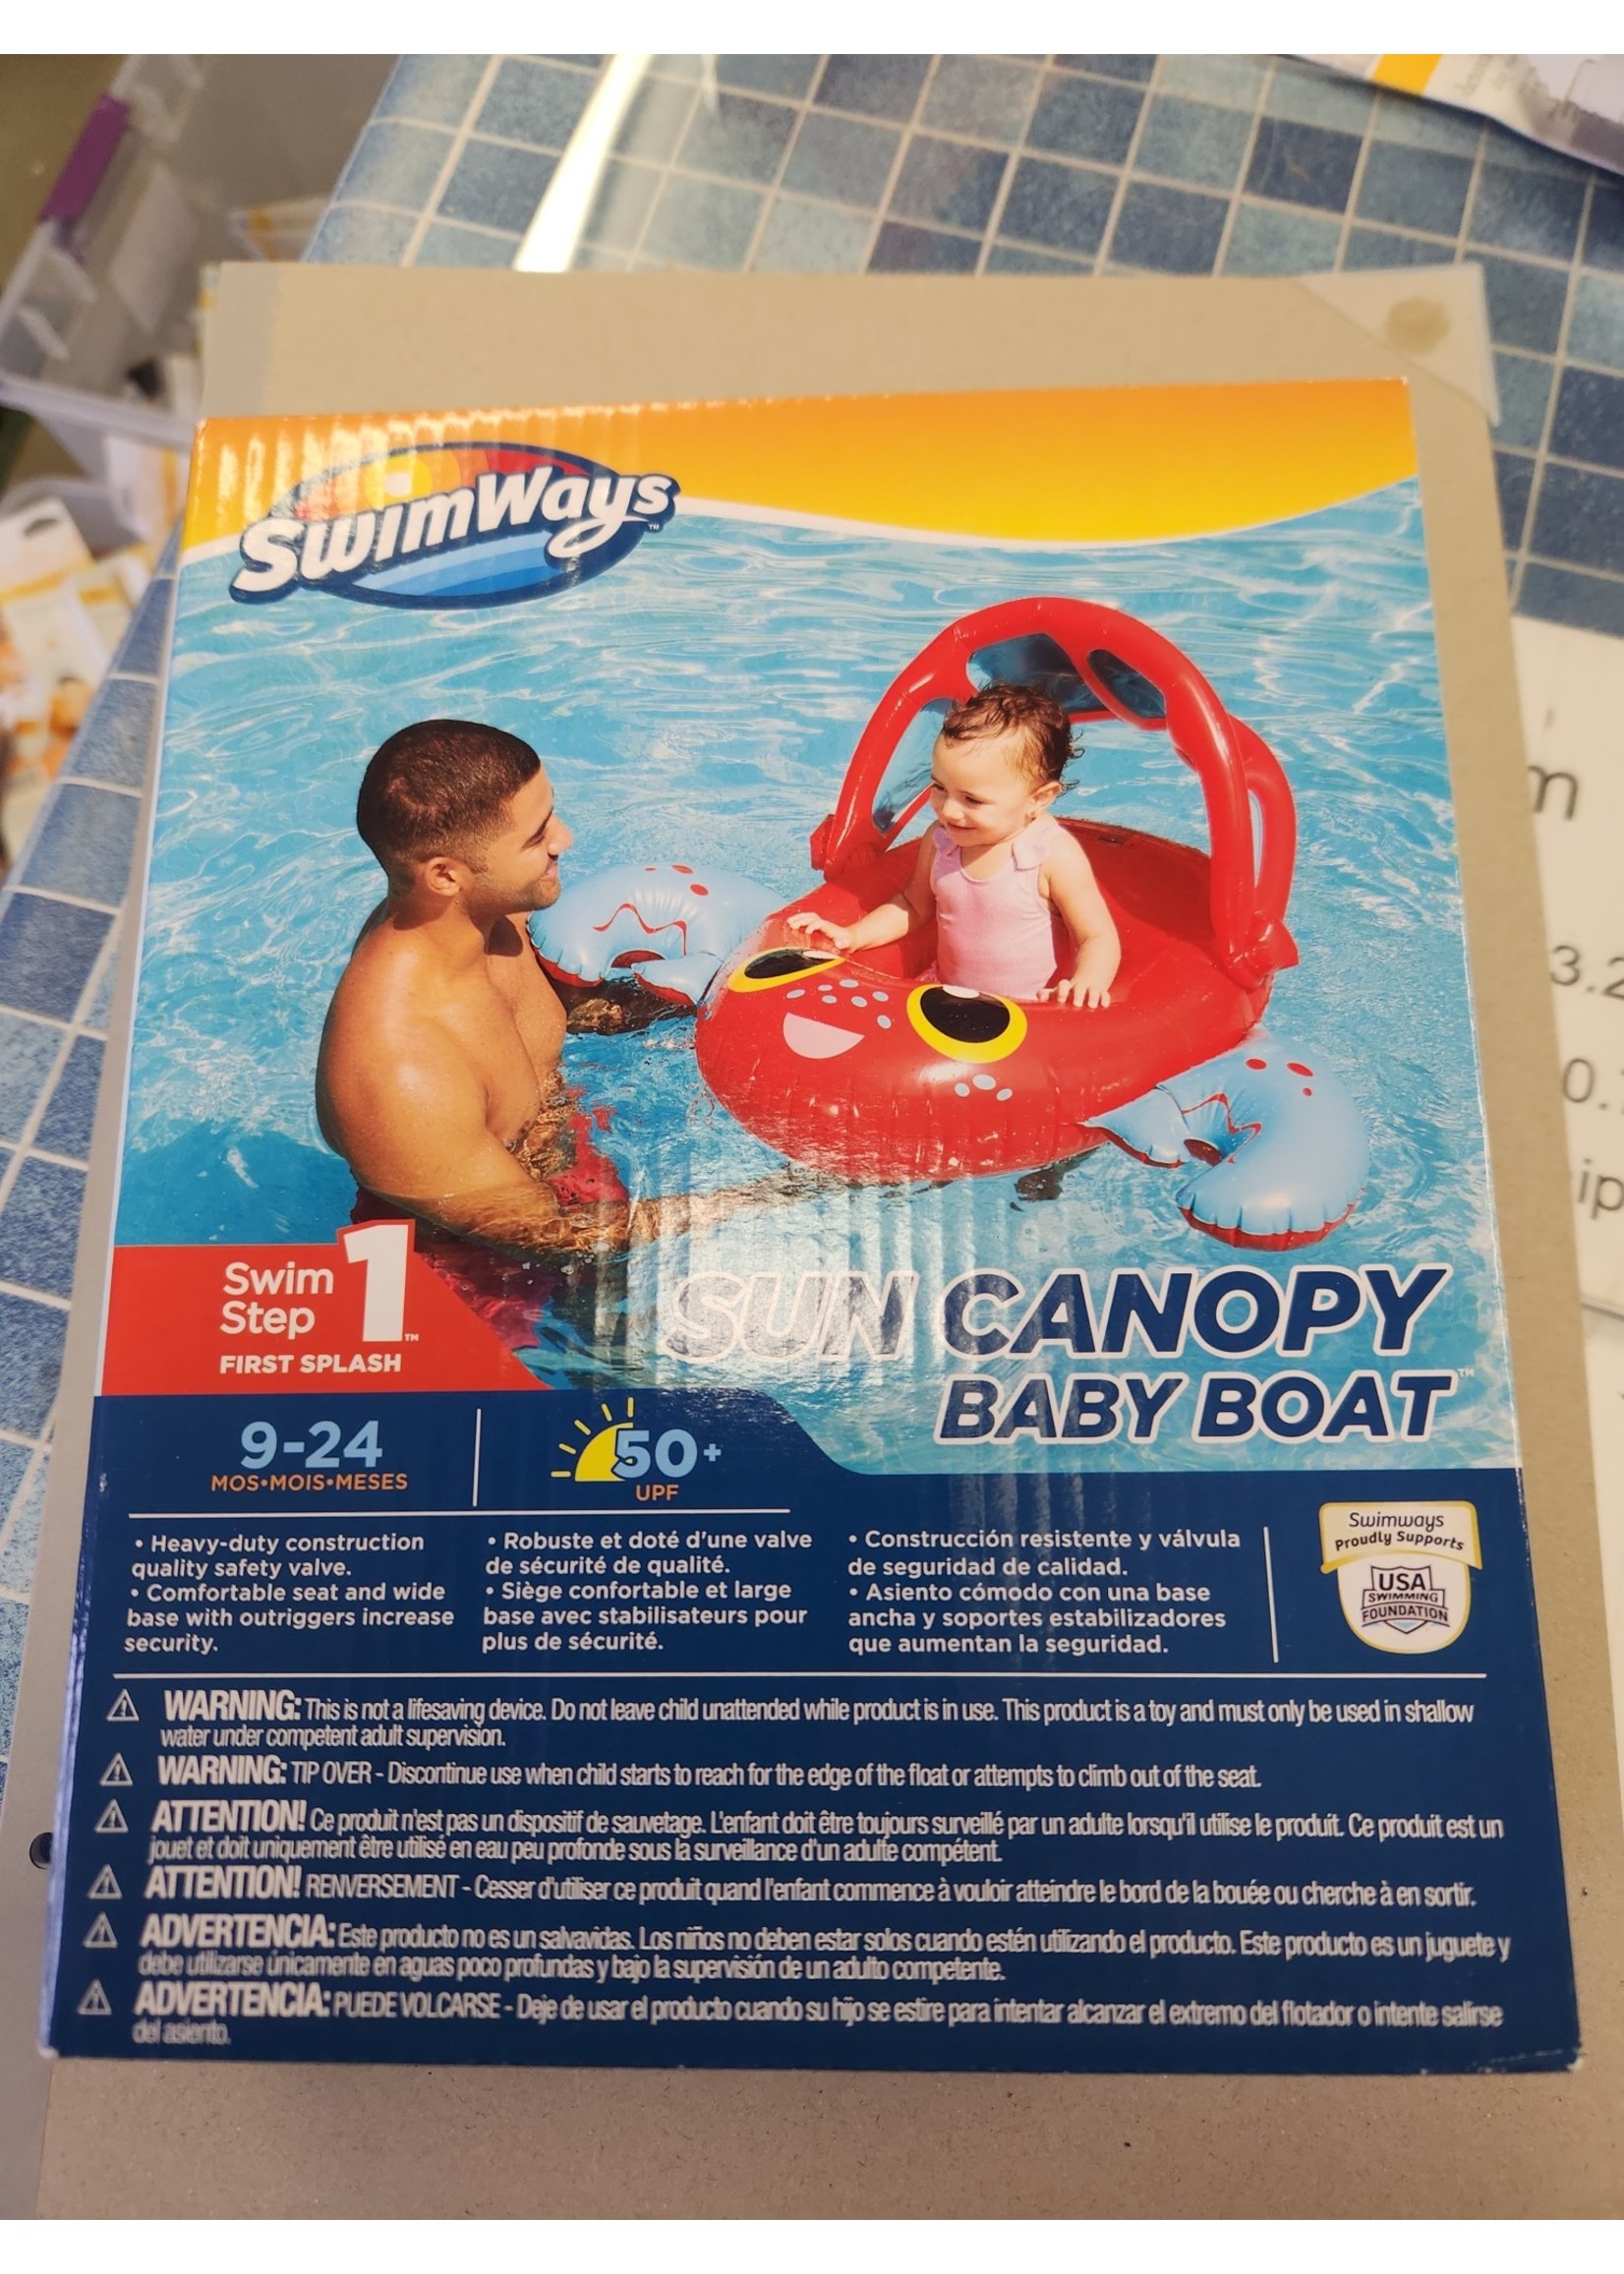 SwimWays Sun Canopy Baby Boat Step 1 Ages 9-24 Months Swimming, Crab